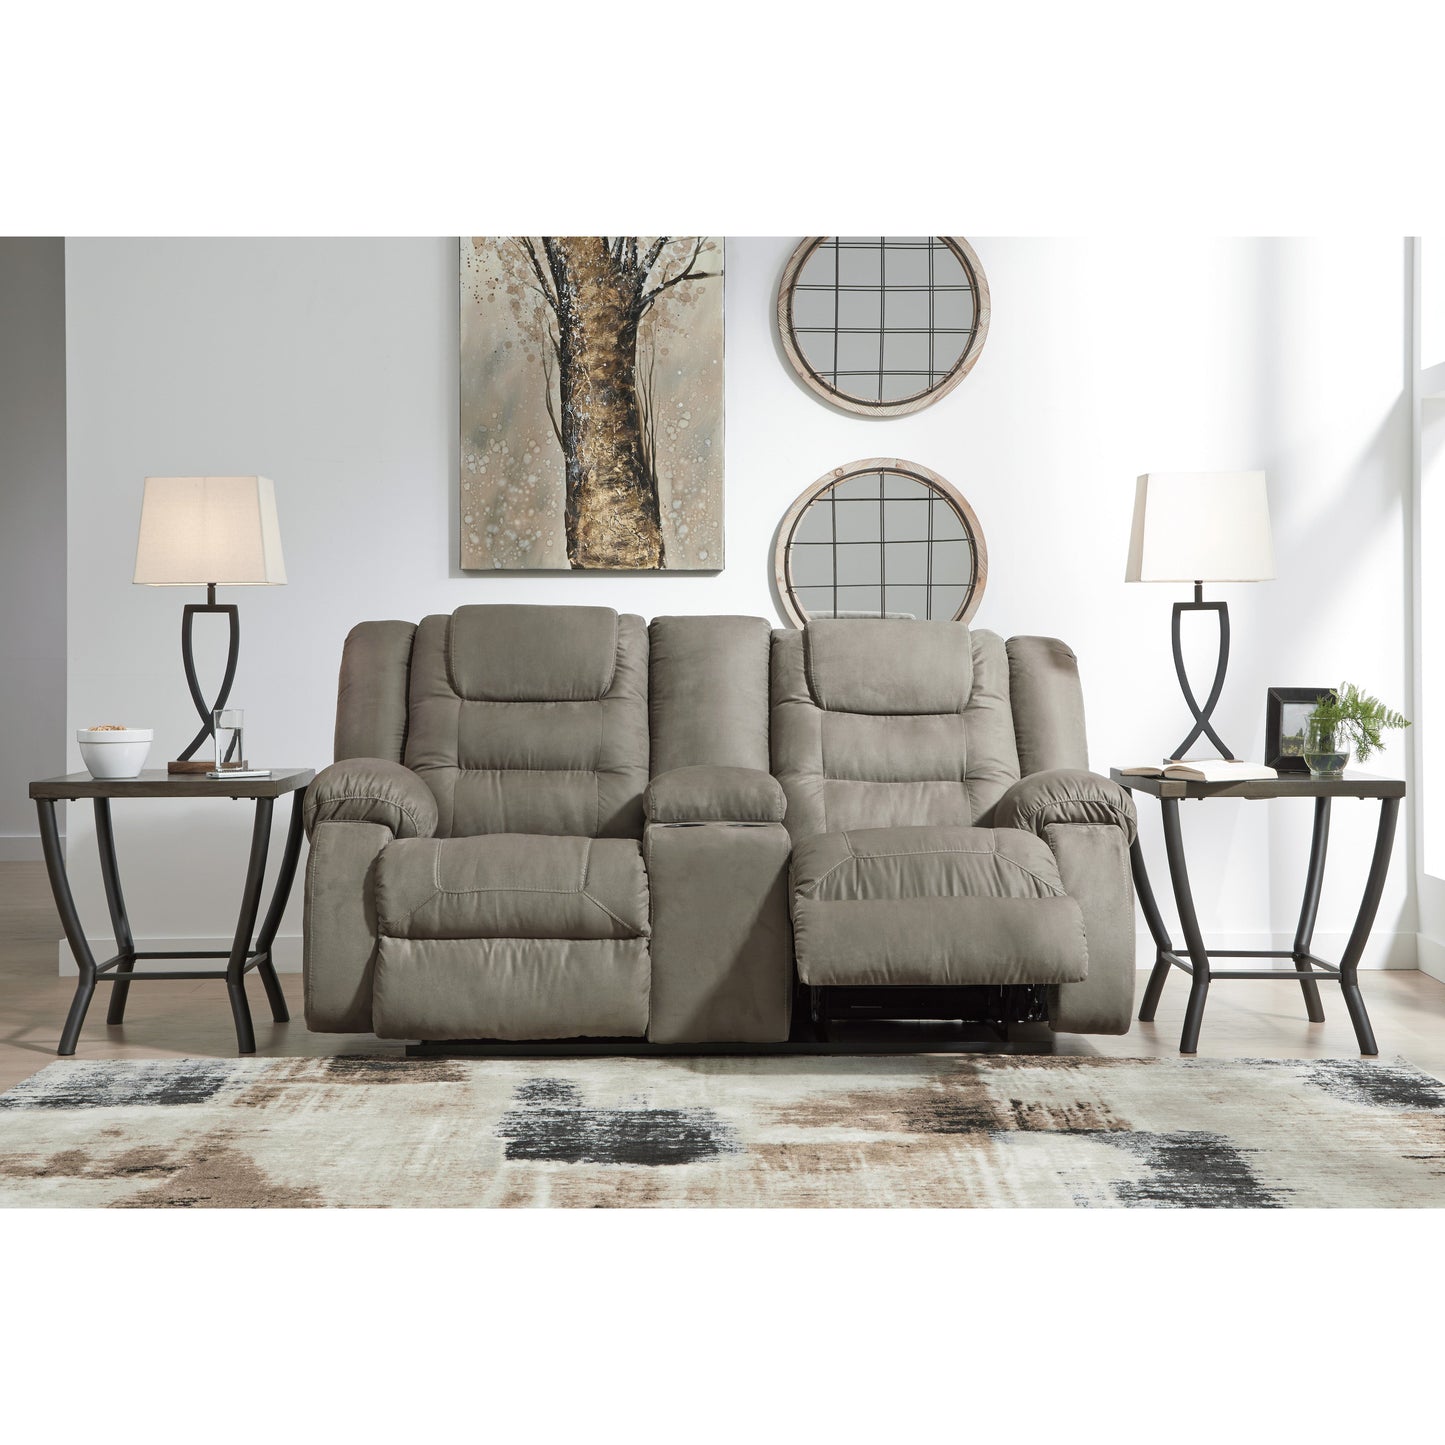 McCADE RECLINING LOVESEAT WITH CONSOLE - COBBLESTONE